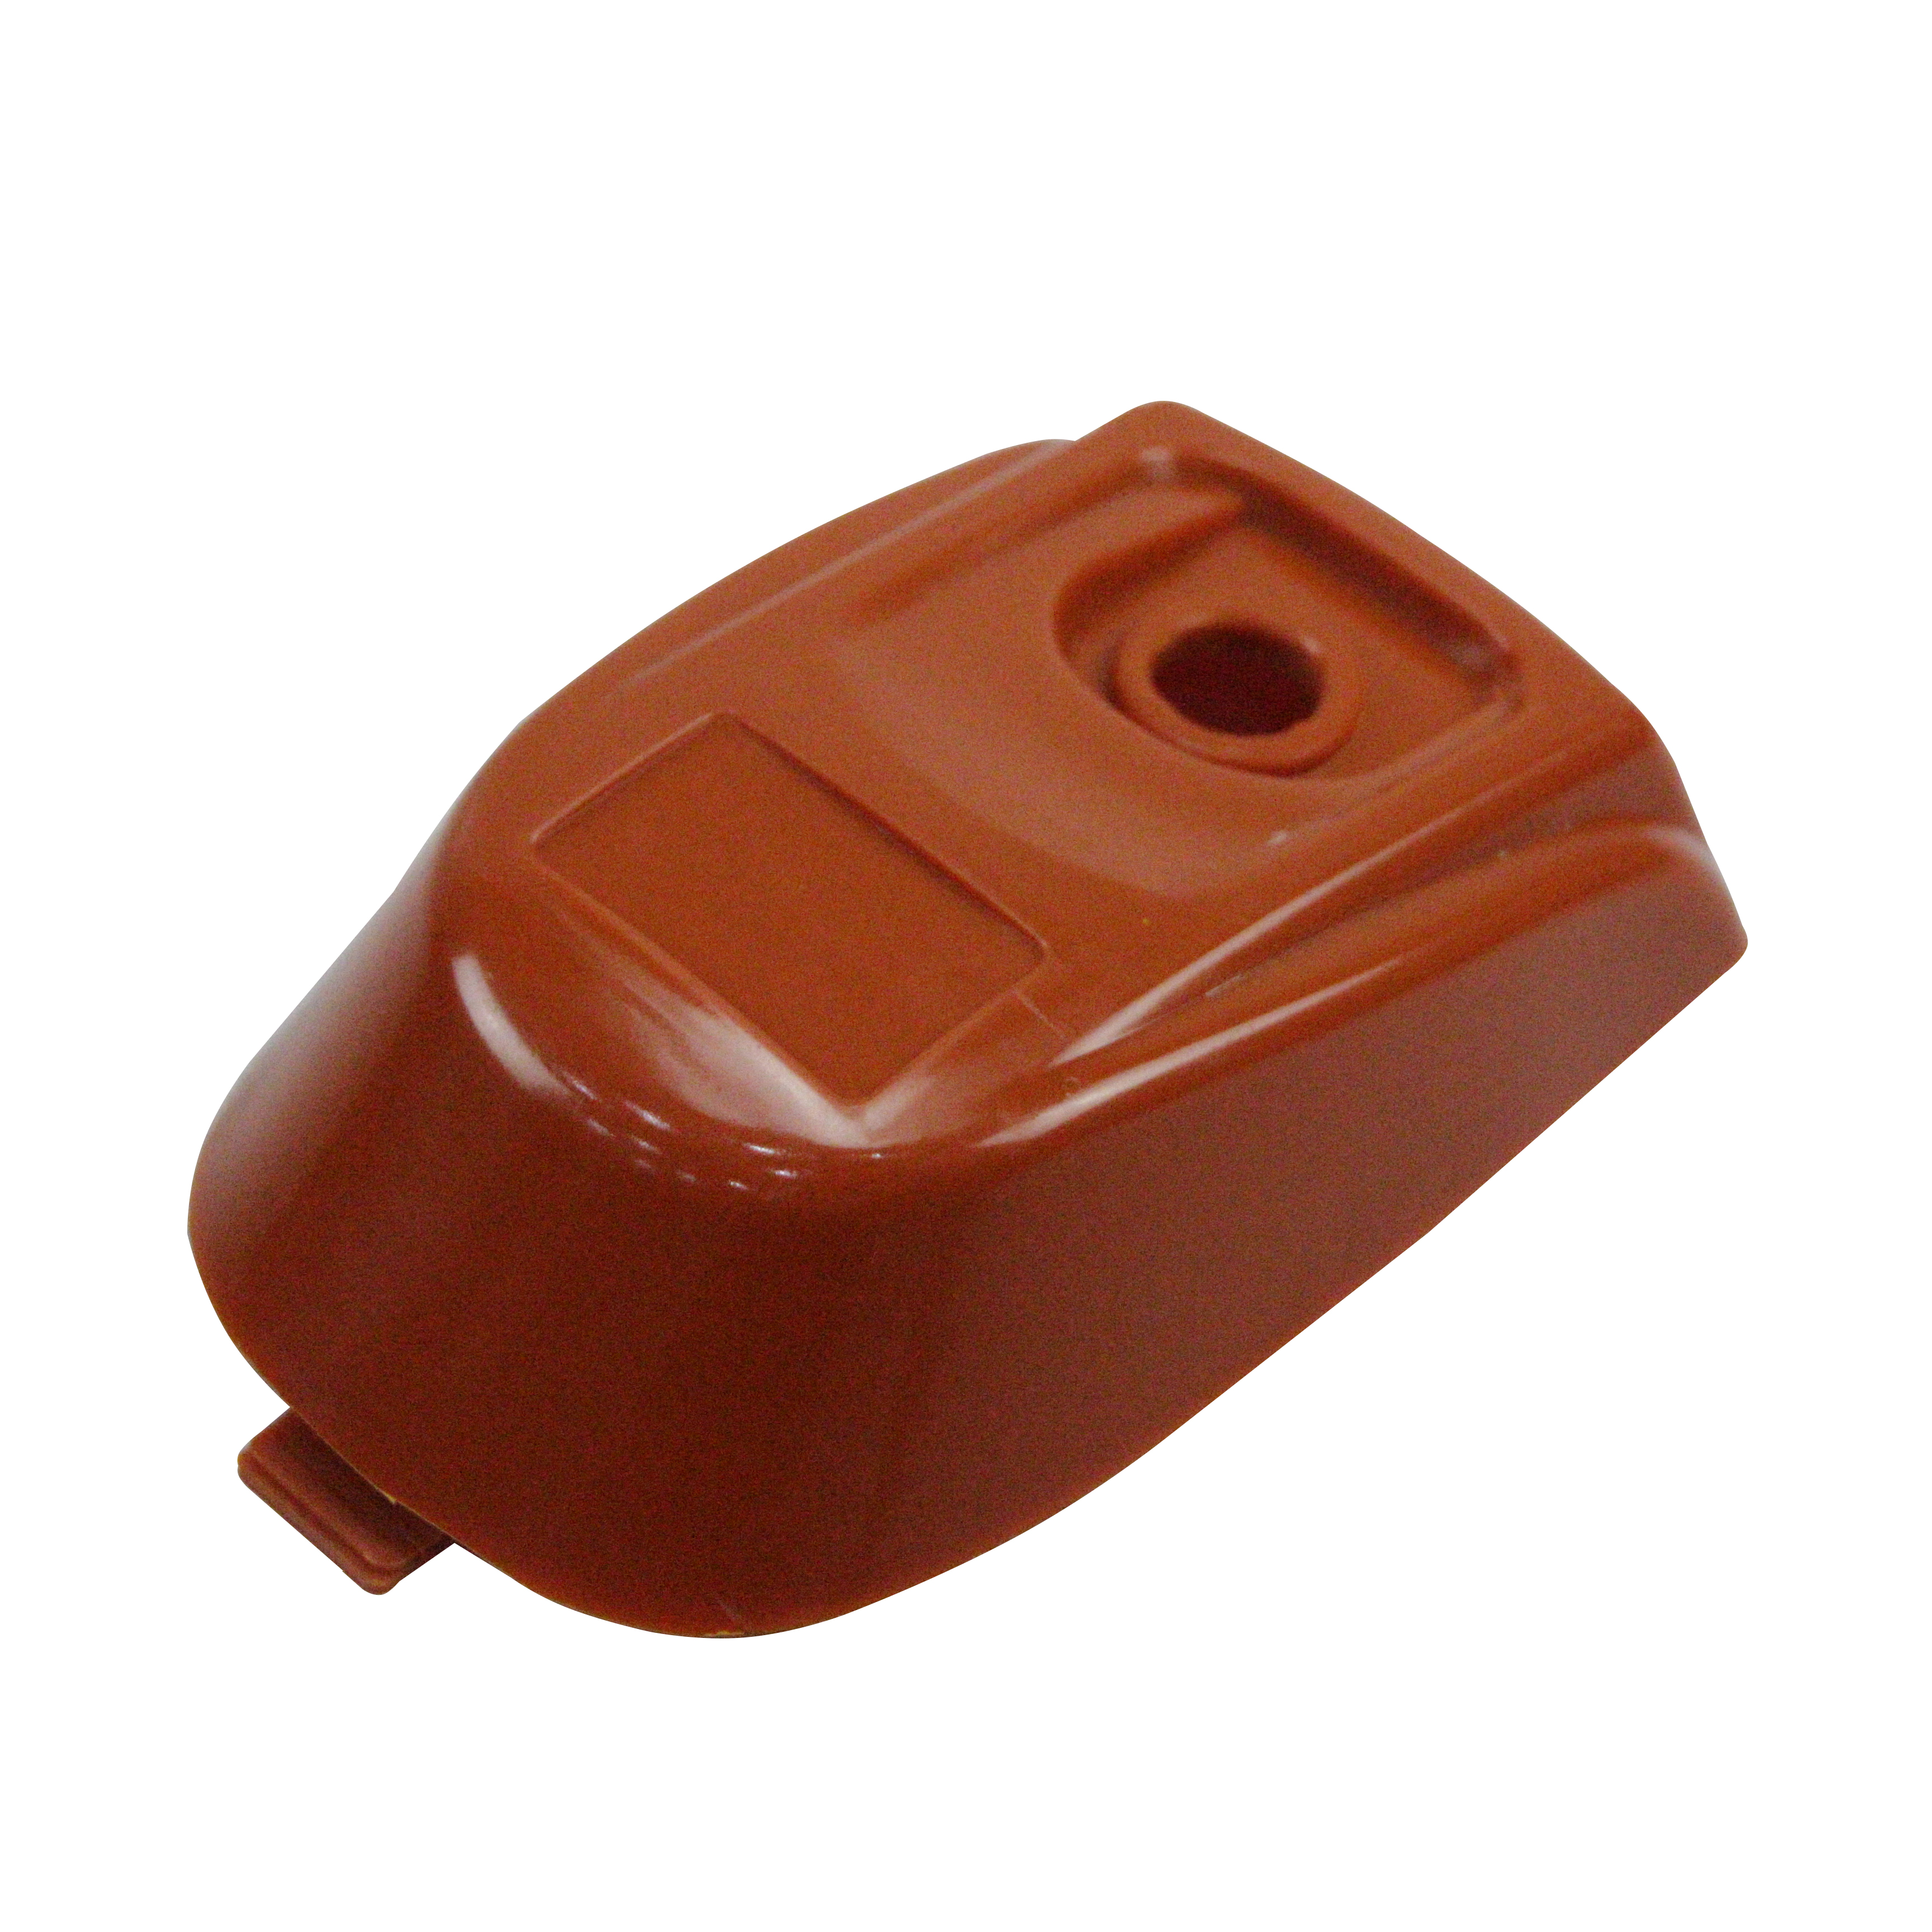 Air Filter Cover For Joncutter G3800 Chainsaw